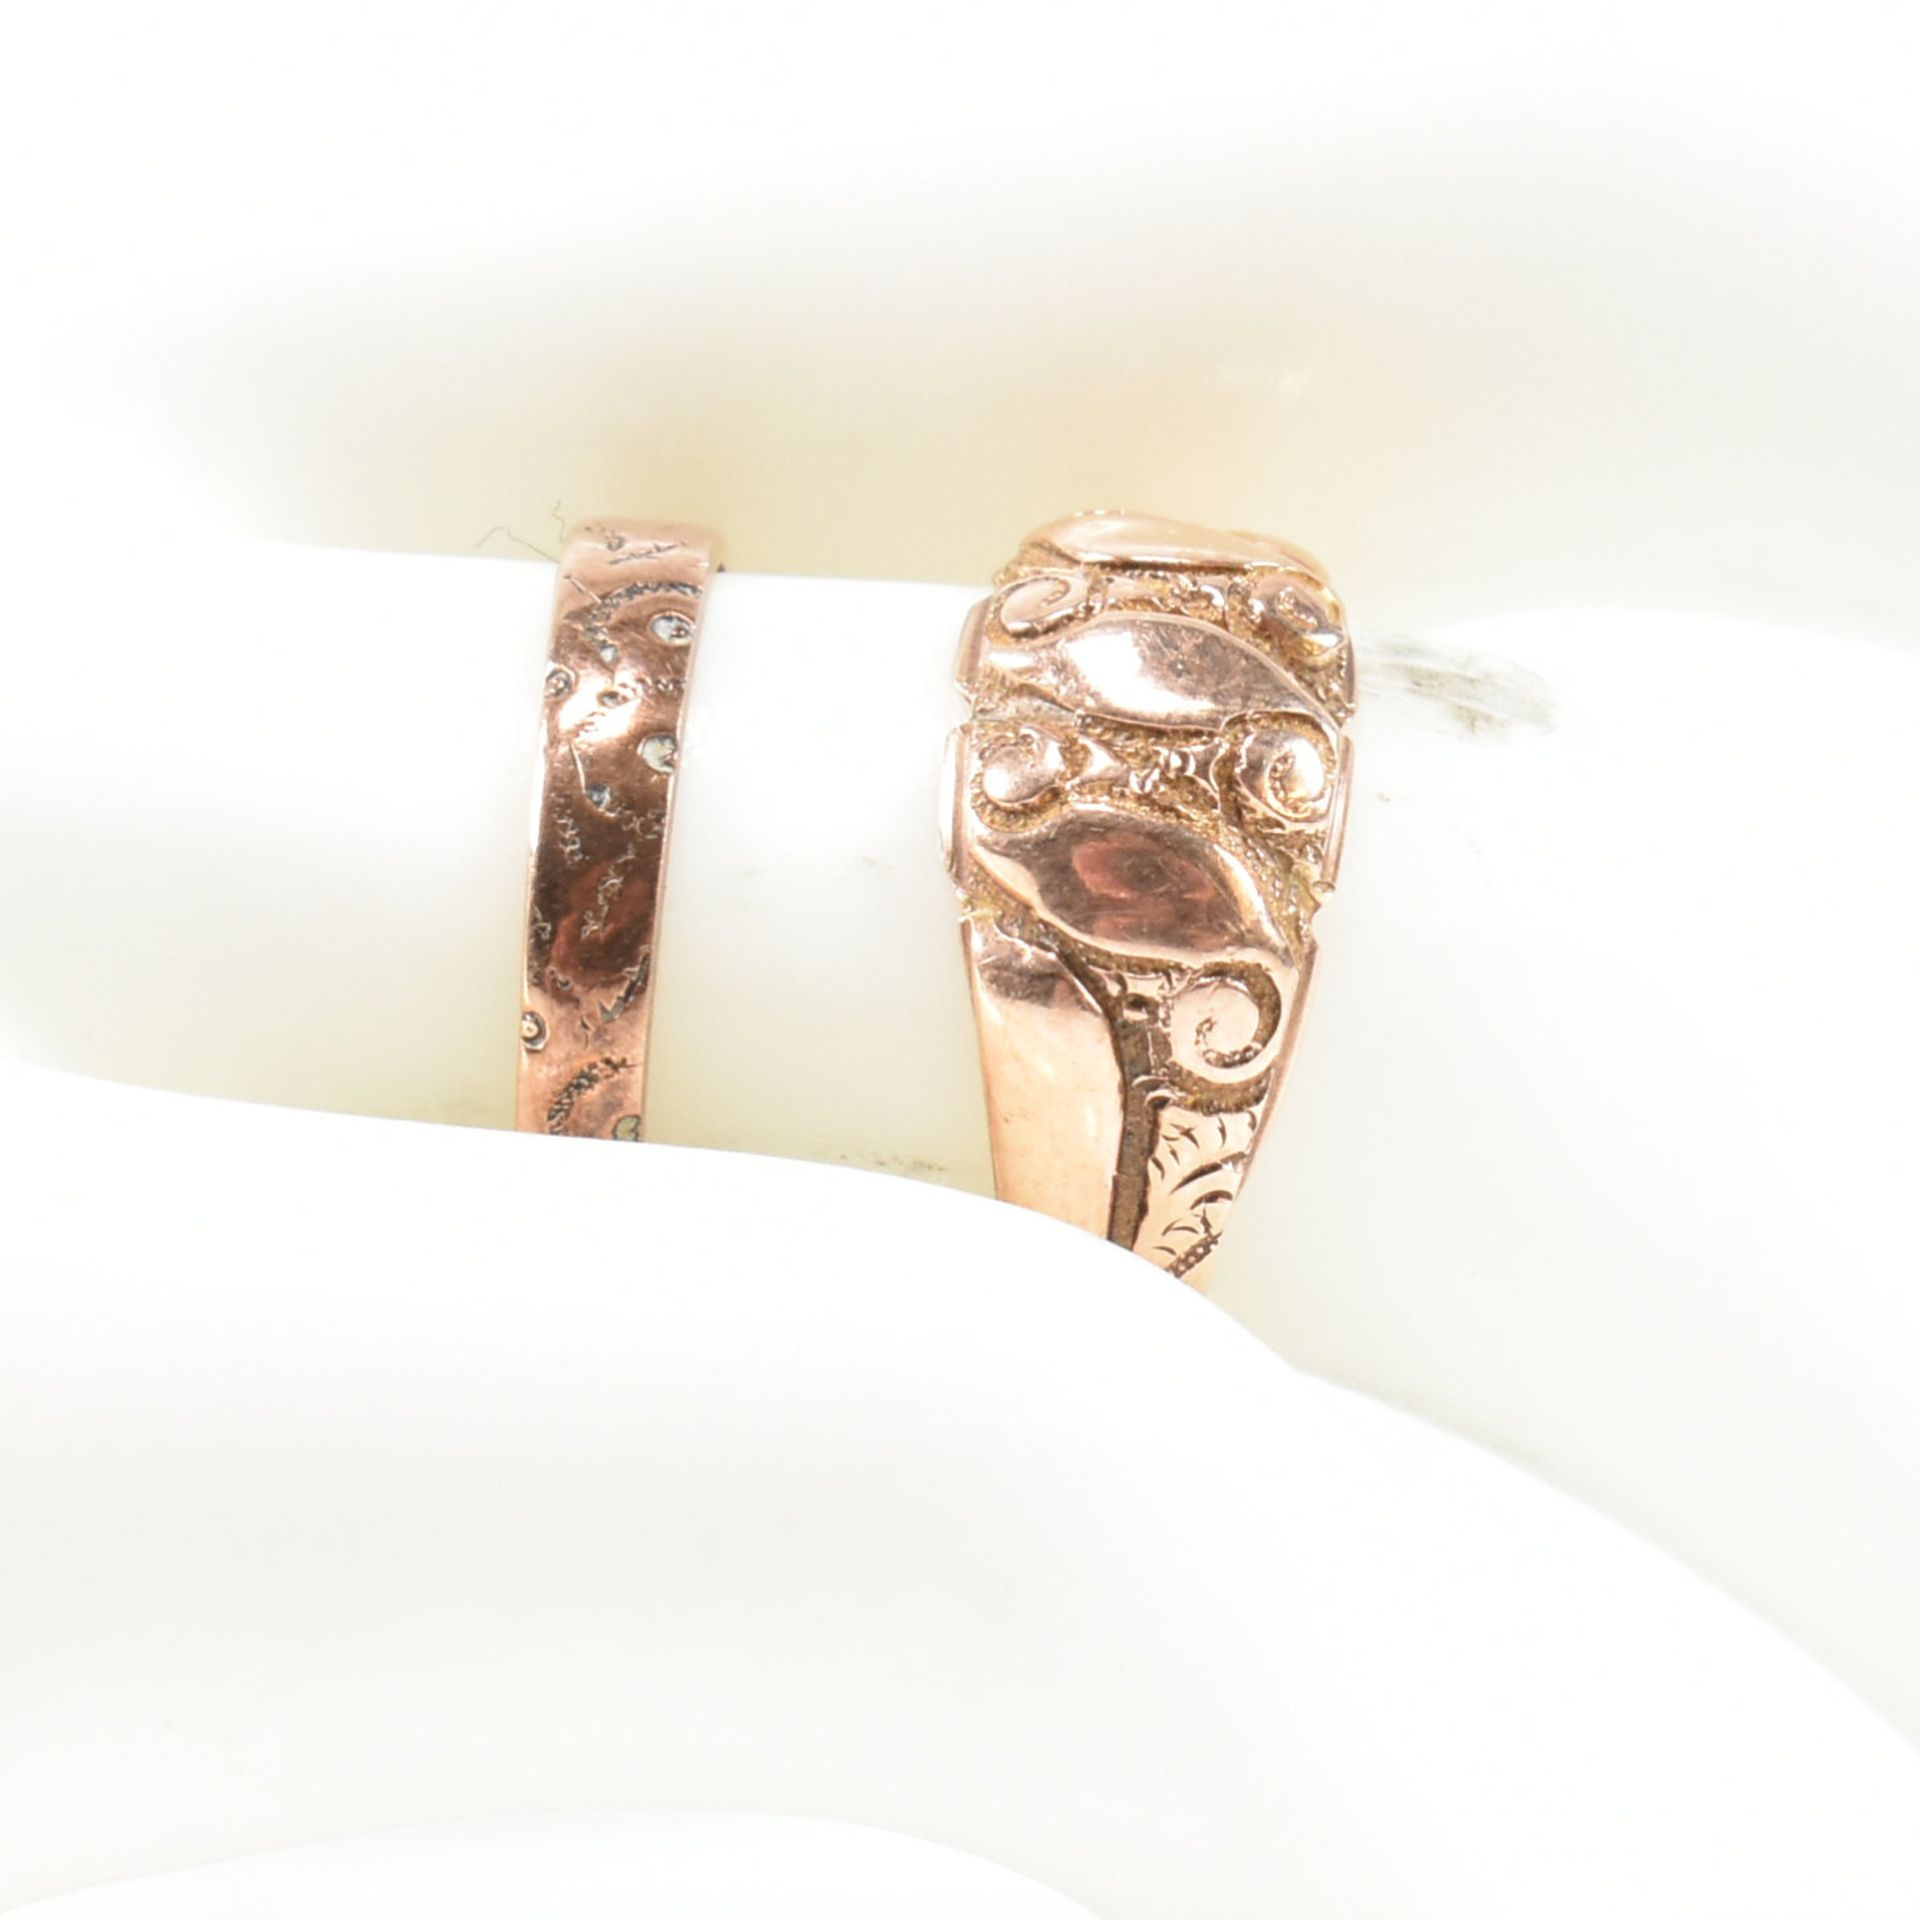 EDWARDIAN HALLMARKED 9CT ROSE GOLD KEEPER RING & VICTORIAN ENGRAVED BAND RING - Image 6 of 6